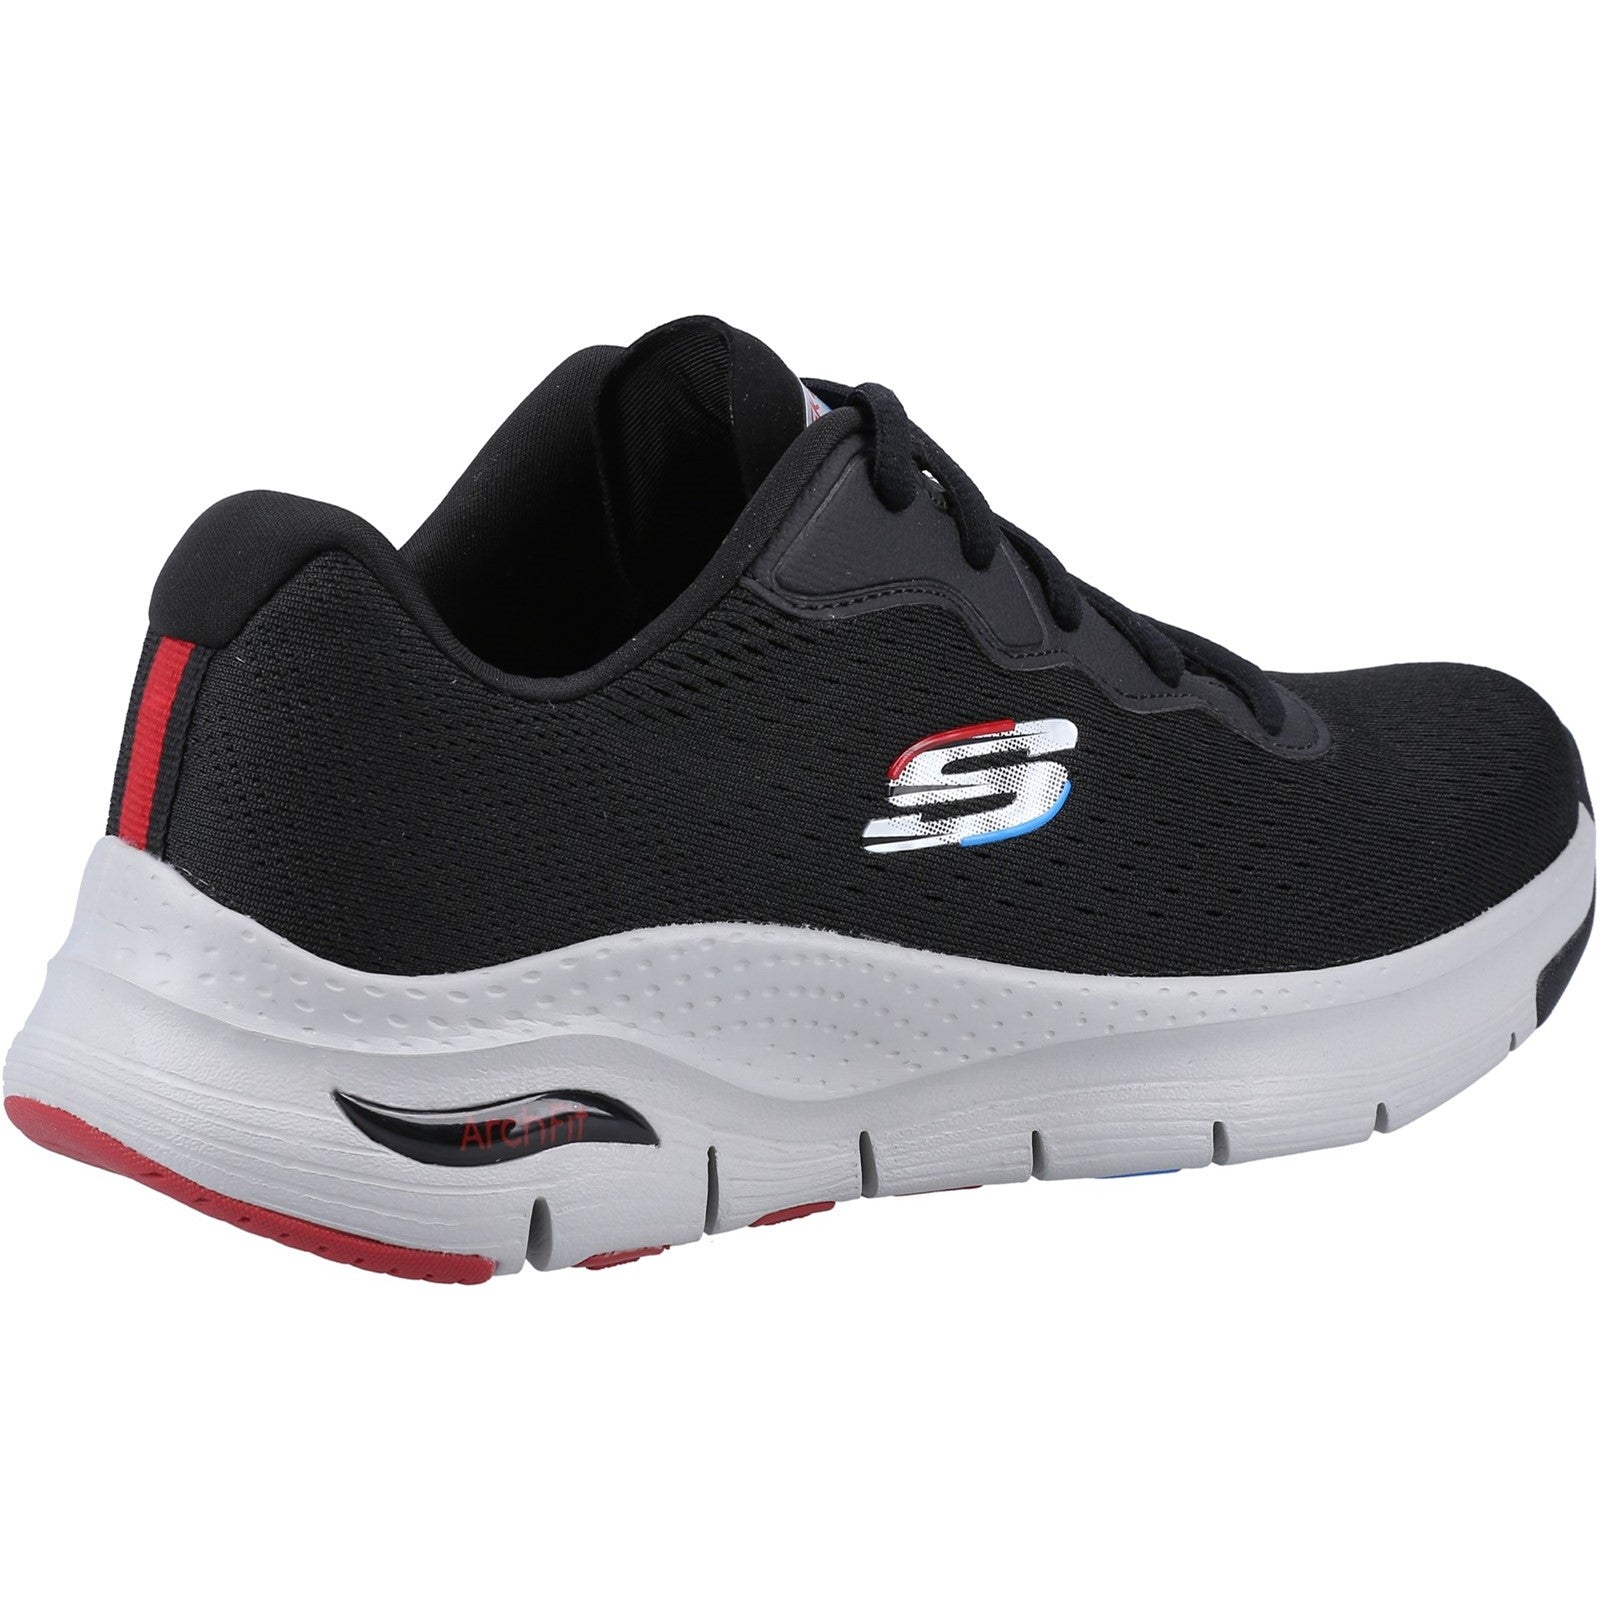 Skechers Mens Arch Fit Trainers - Black